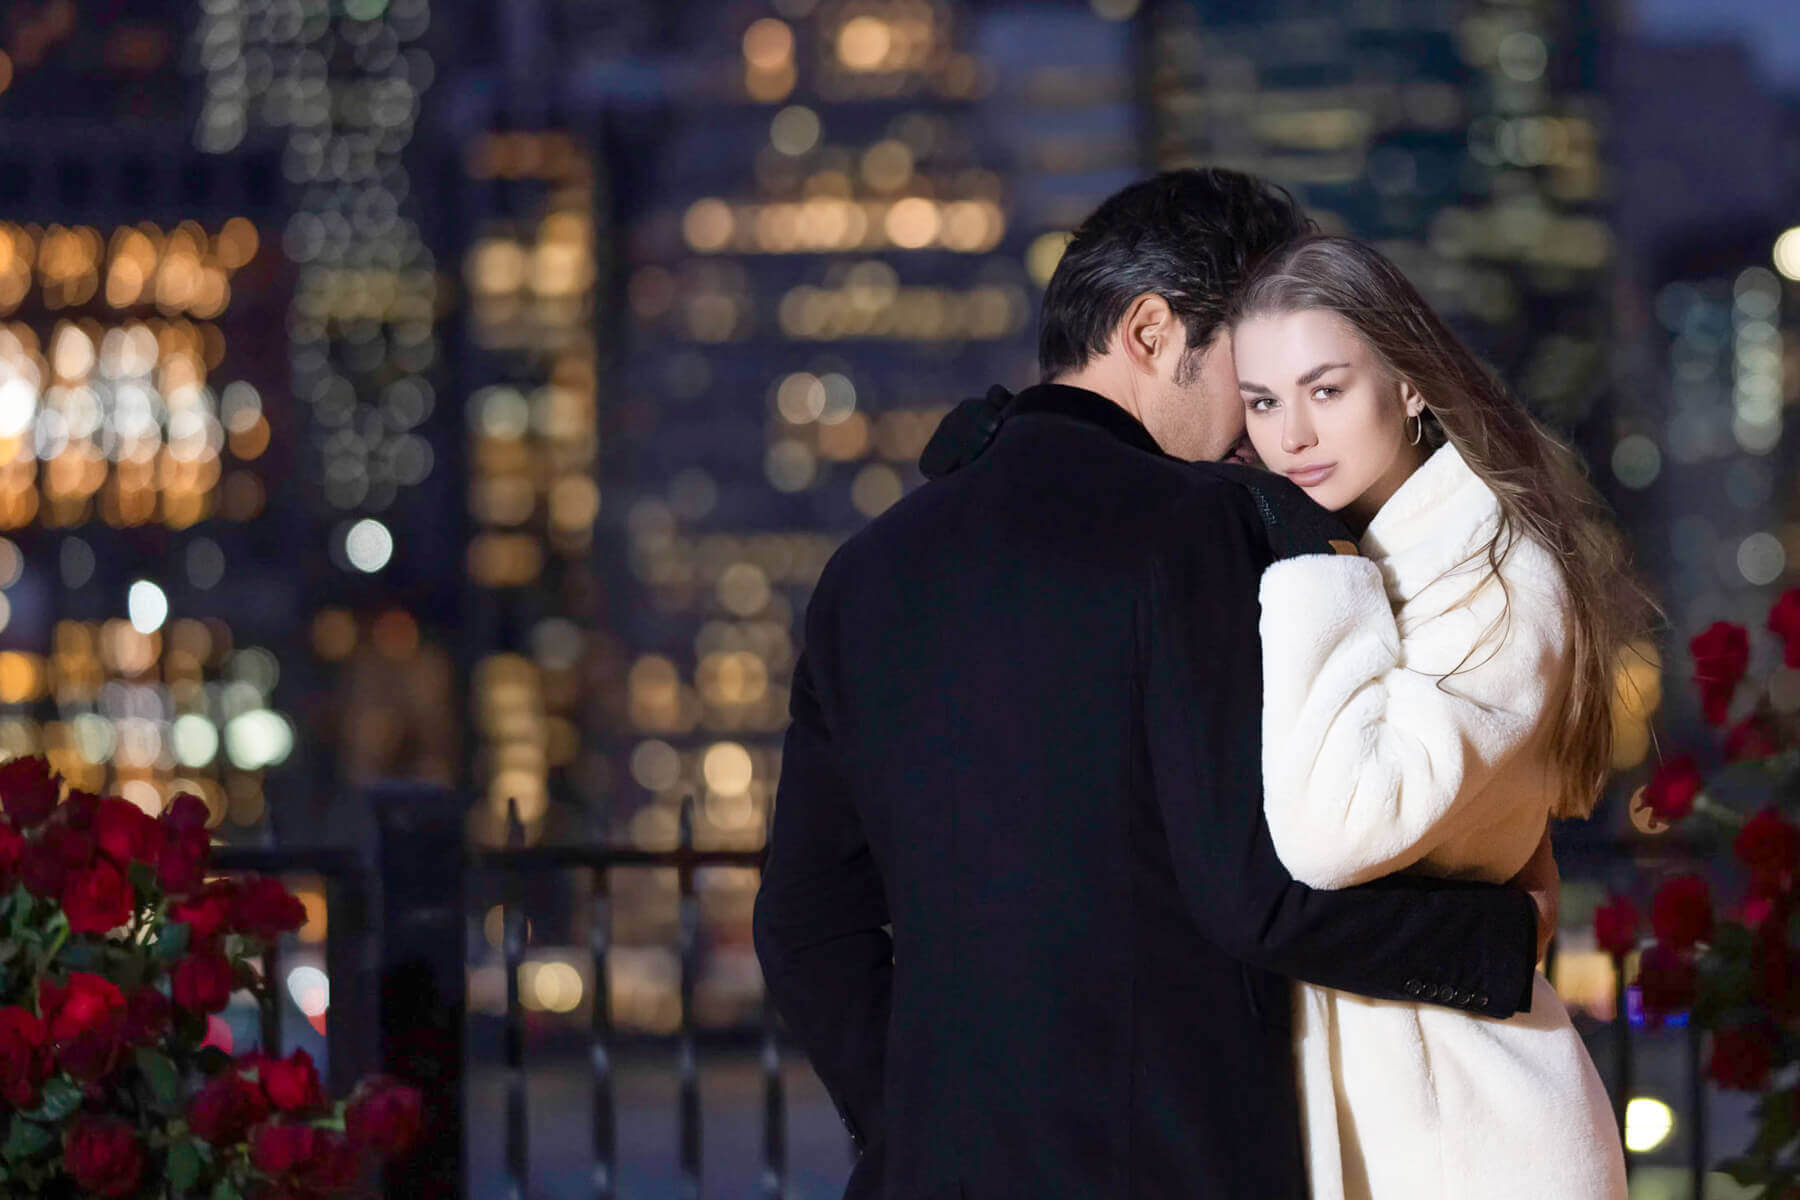 Stunning couple embracing for their engagement photos in NYC, captured moments after getting engaged.